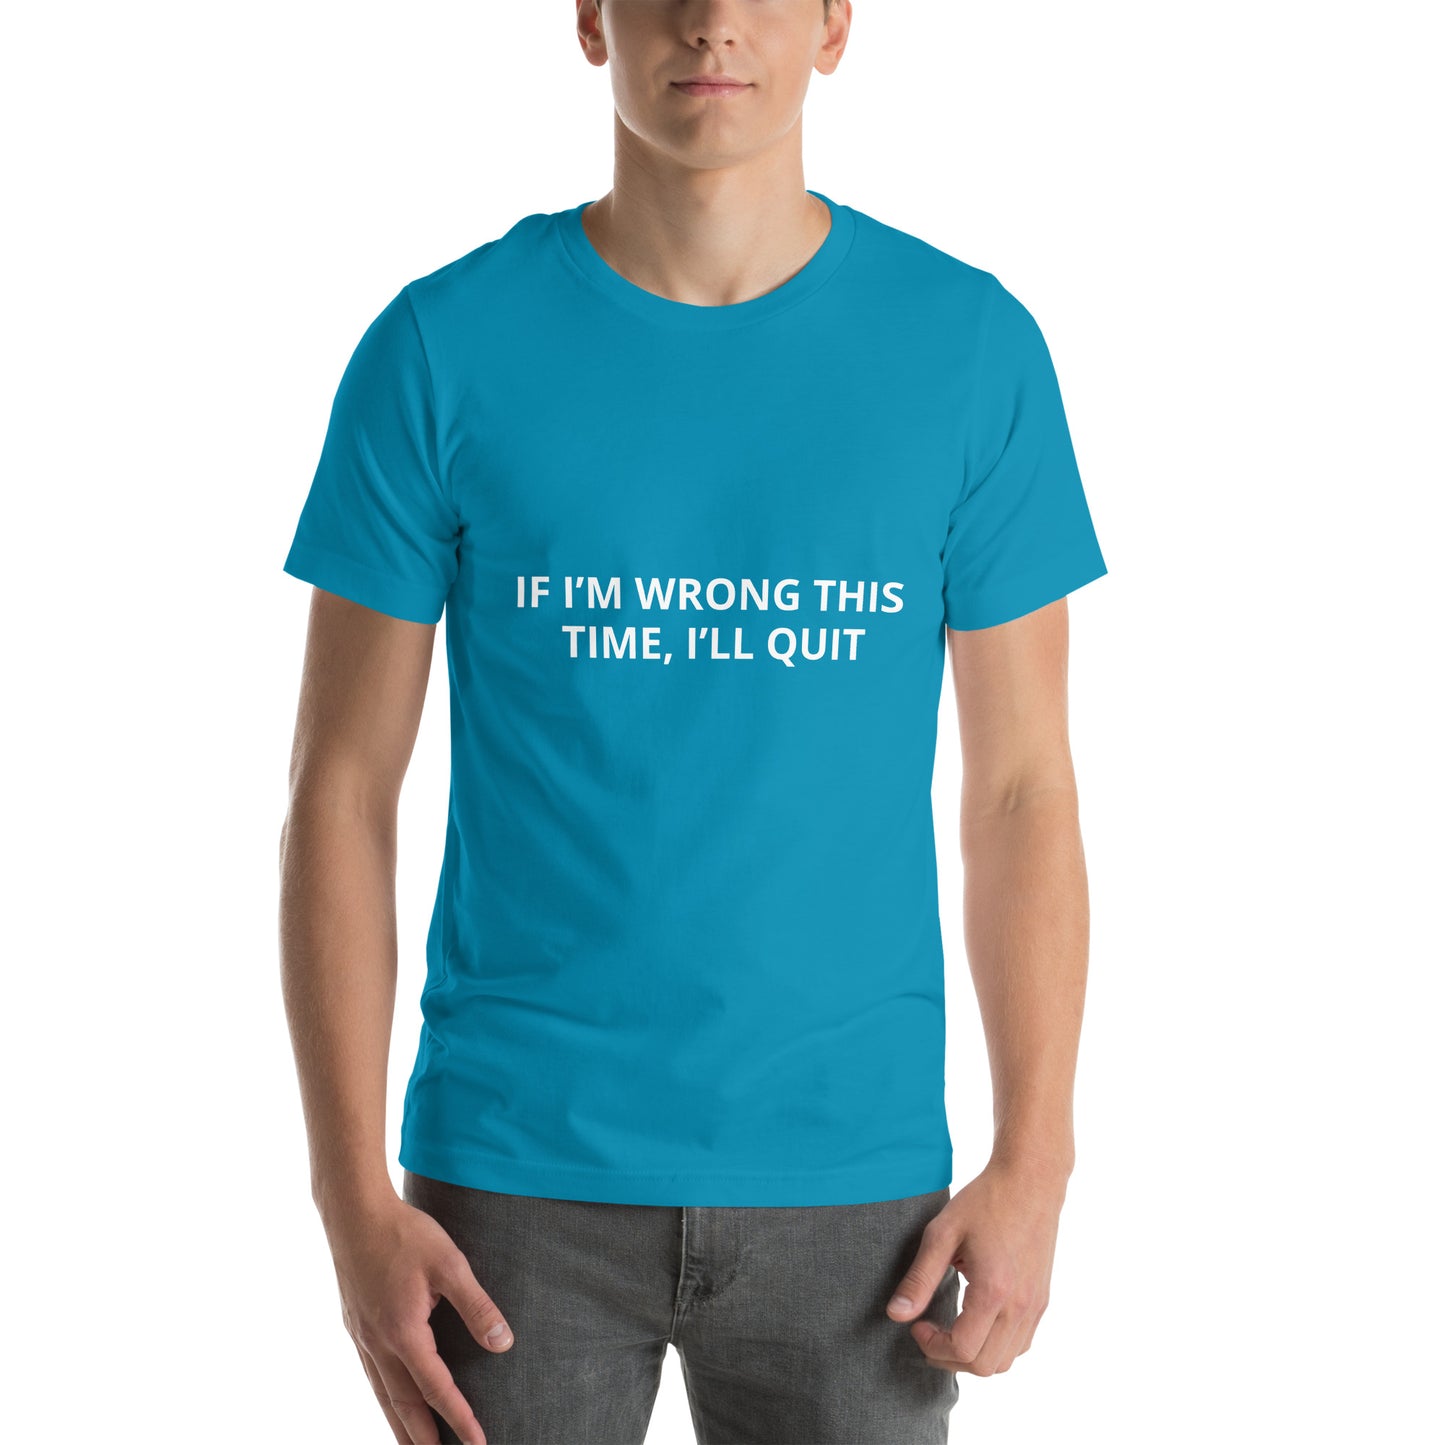 IF I’M WRONG THIS TIME, I’LL QUIT  Unisex t-shirt